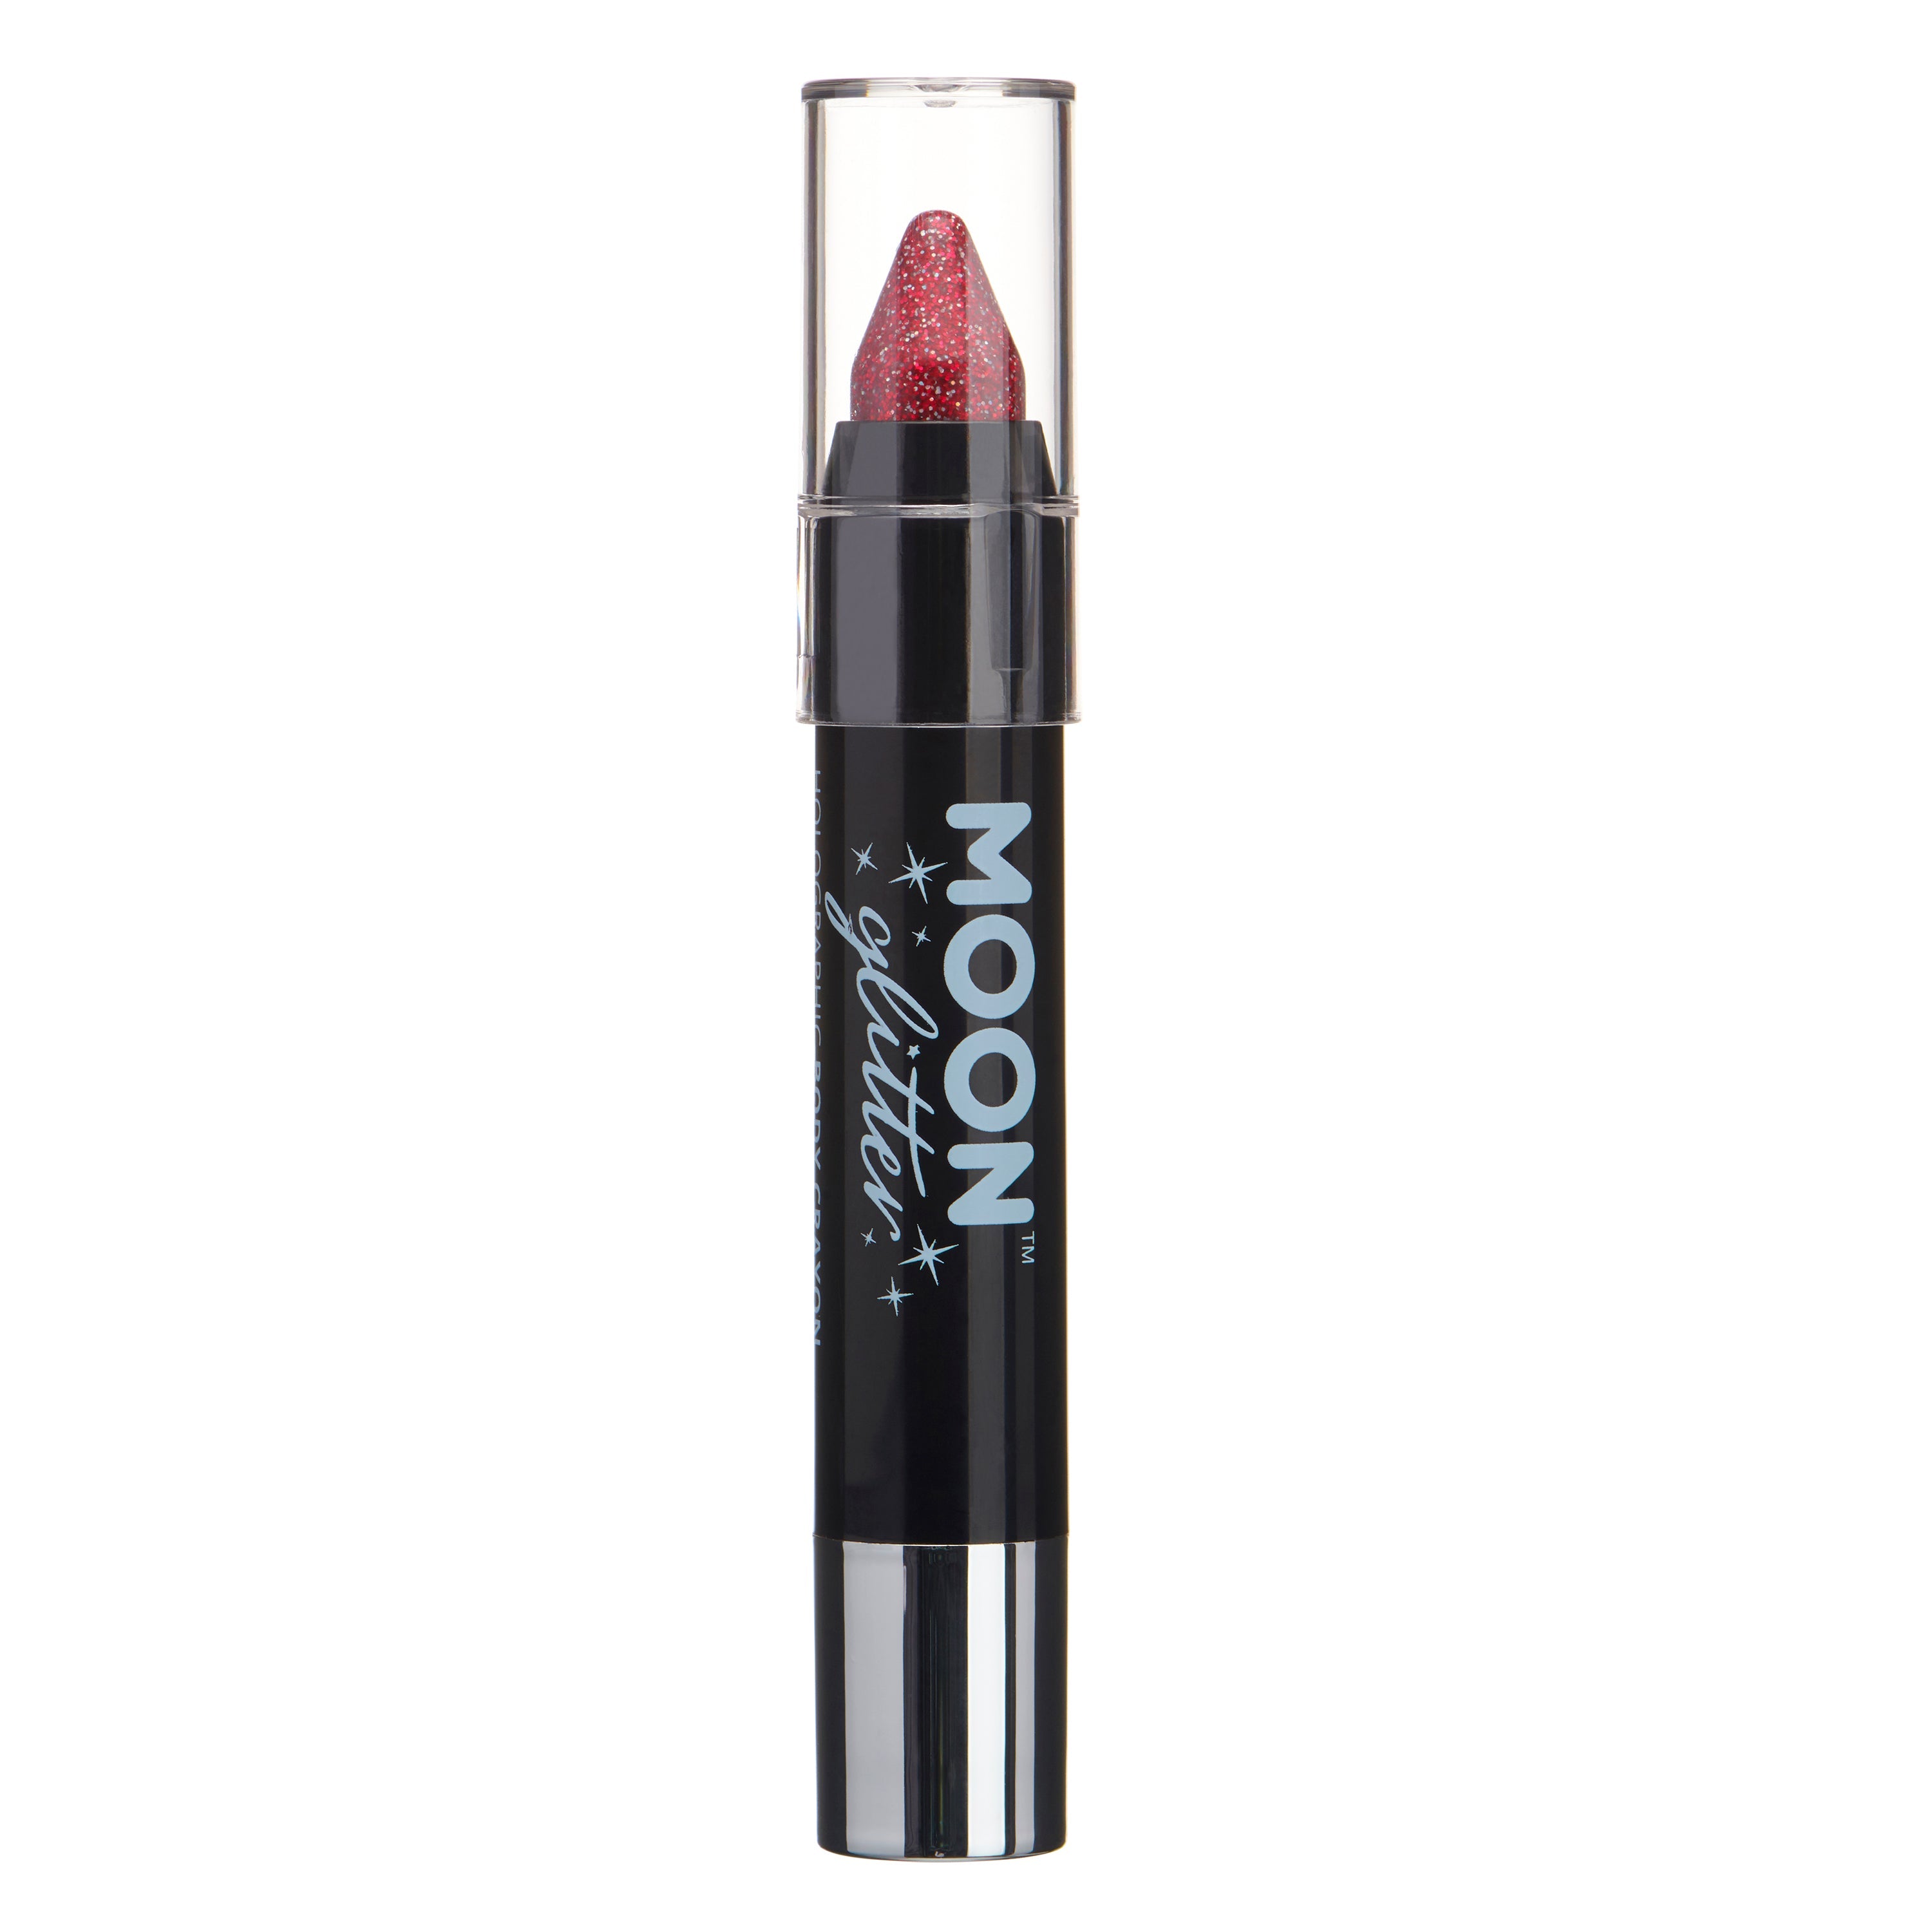 Red - Holographic Glitter Face & Body Crayon, 3.5g. Cosmetically certified, FDA & Health Canada compliant and cruelty free.